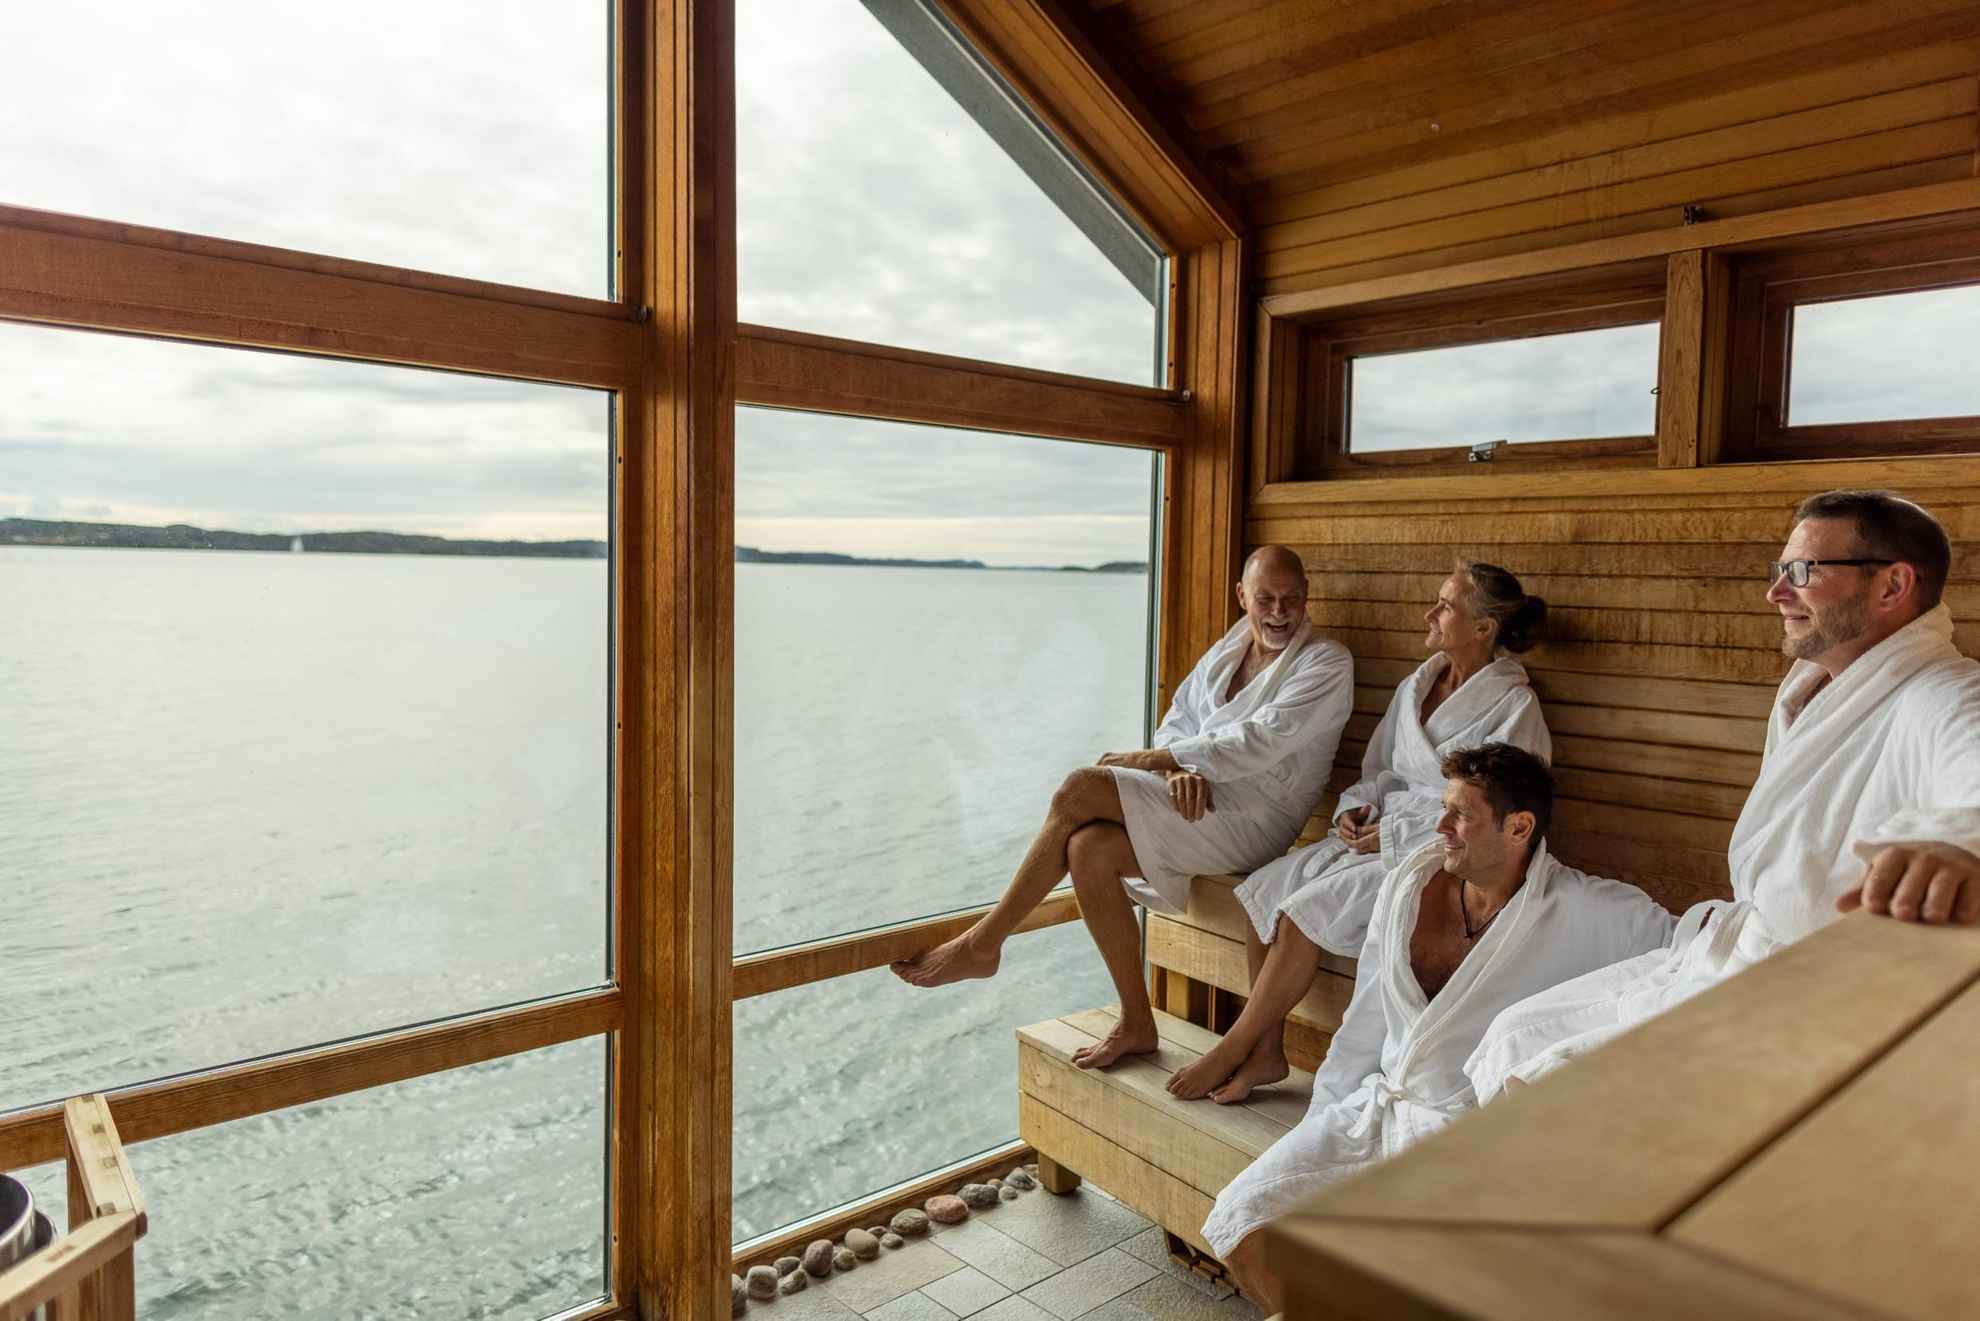 Four people enjoying the sauna and the view of the sea.